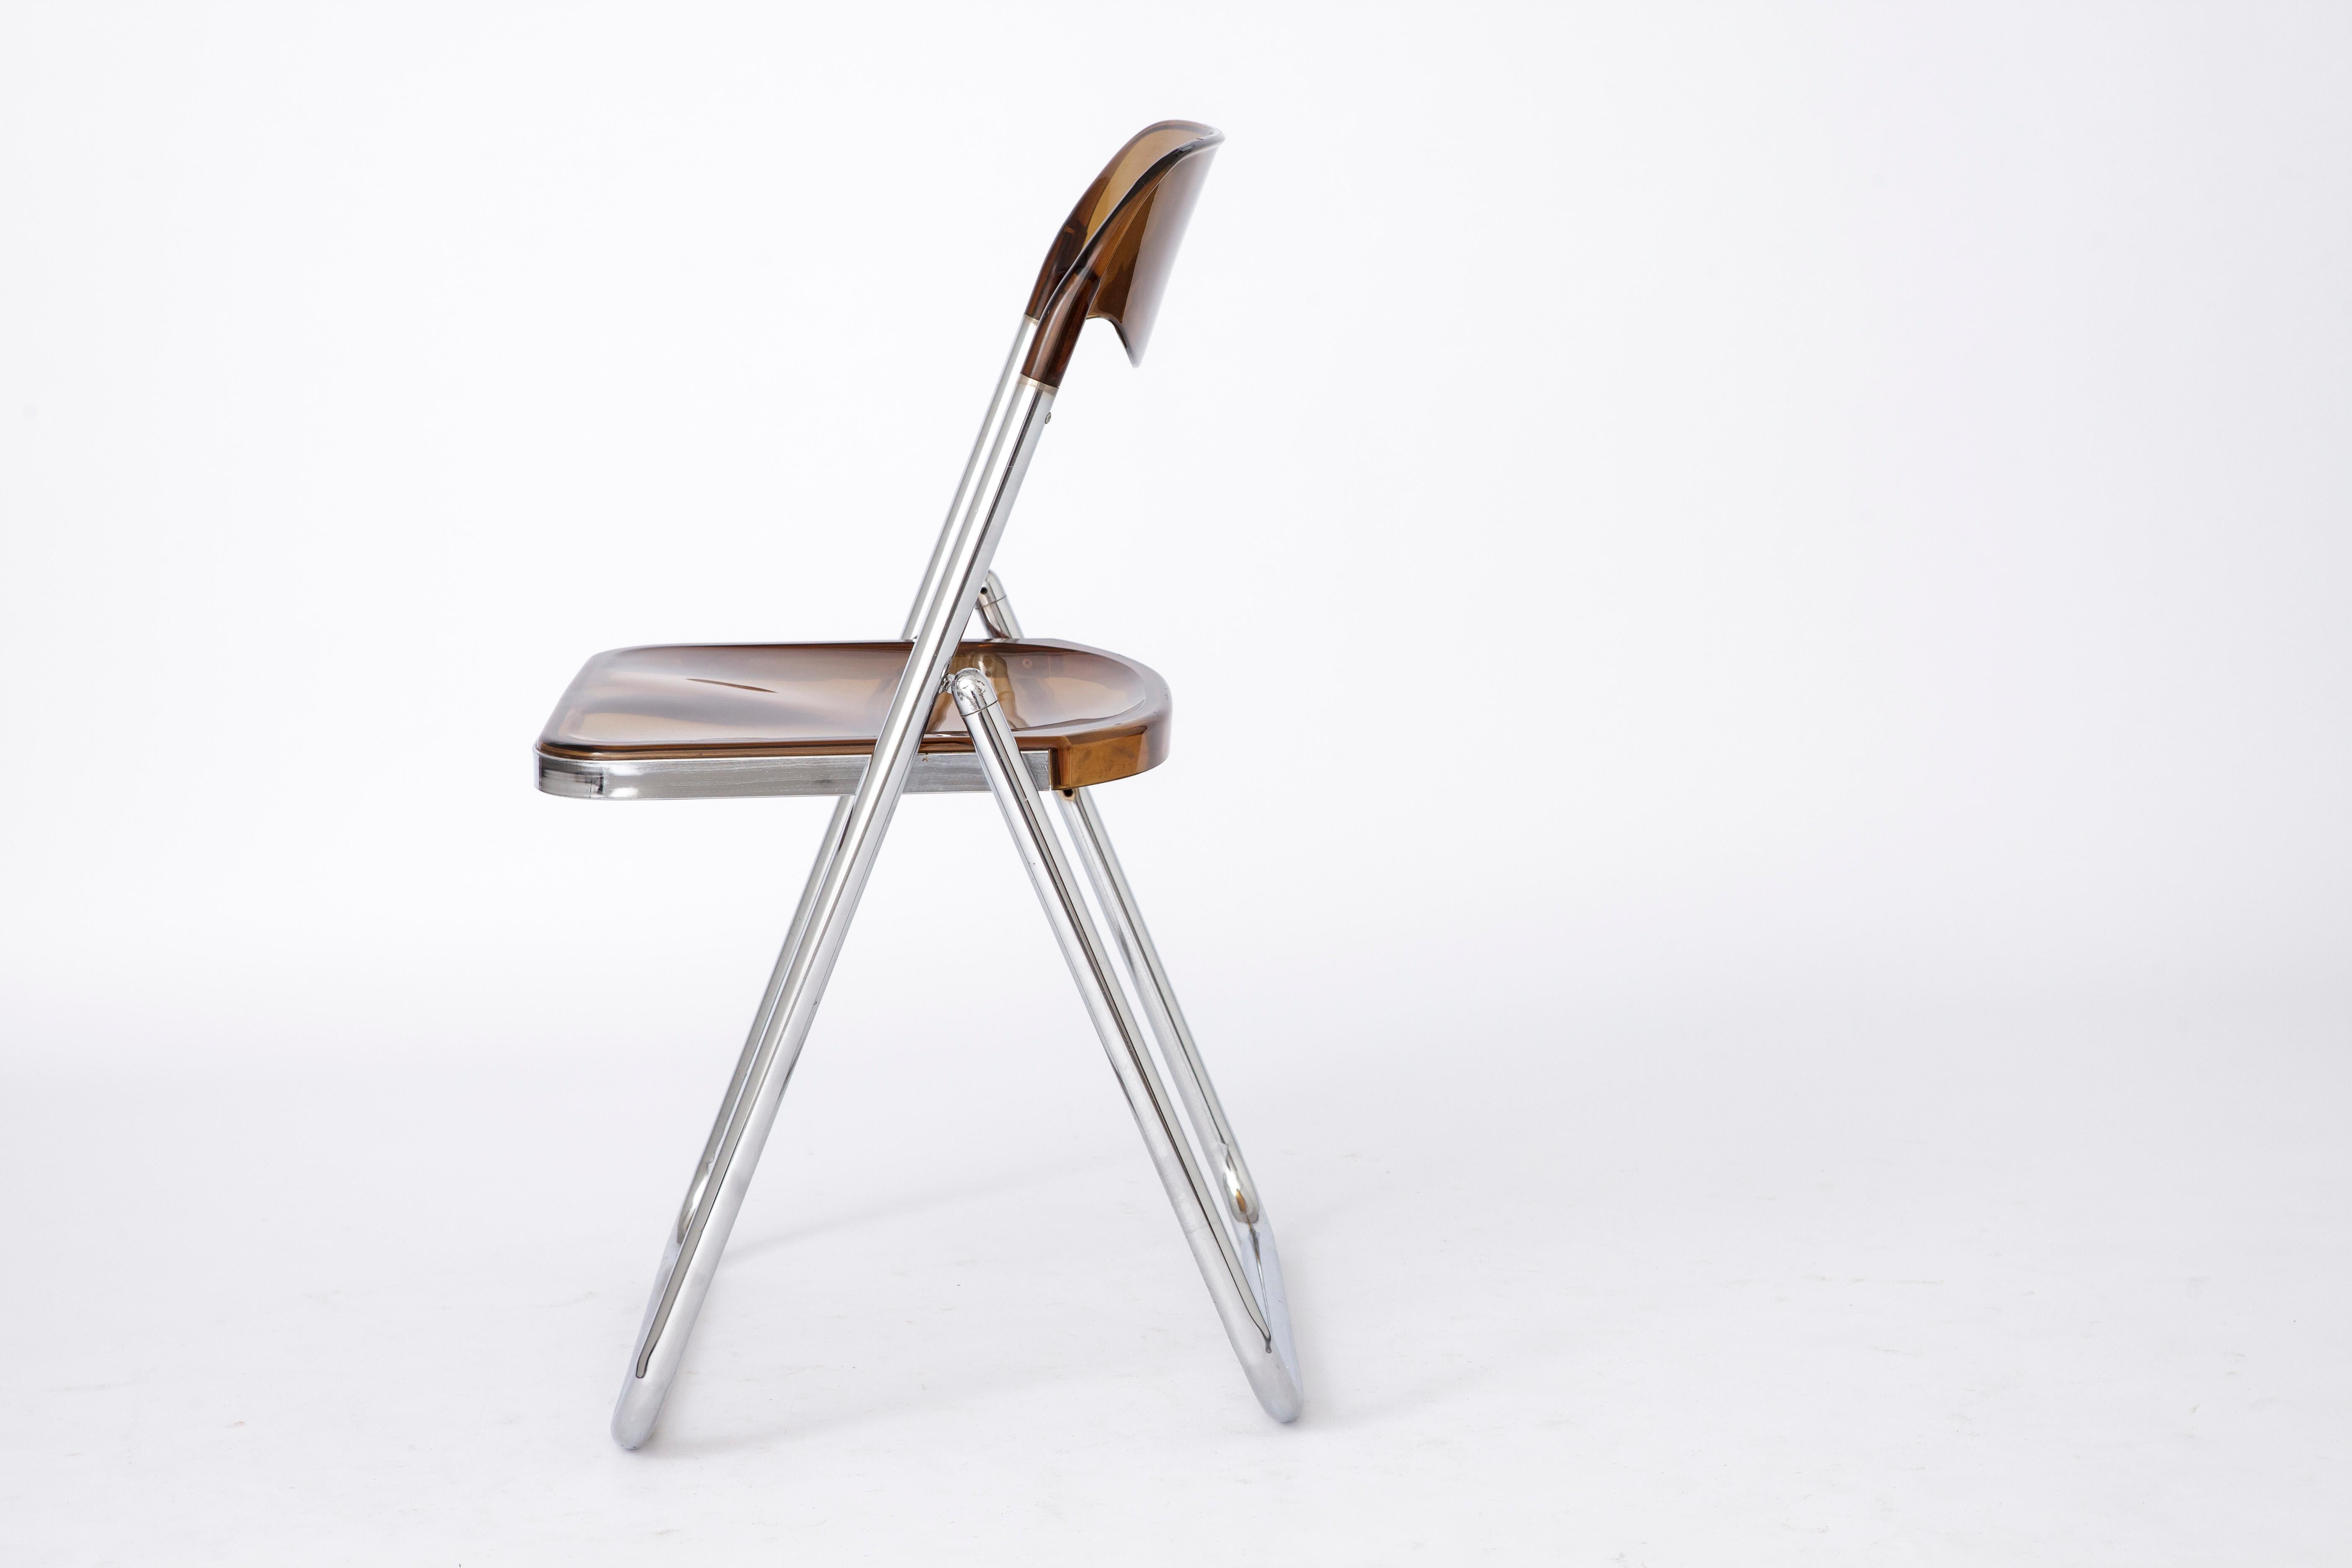 Polychromed Vintage Folding Chair 1960s-1970s Italy